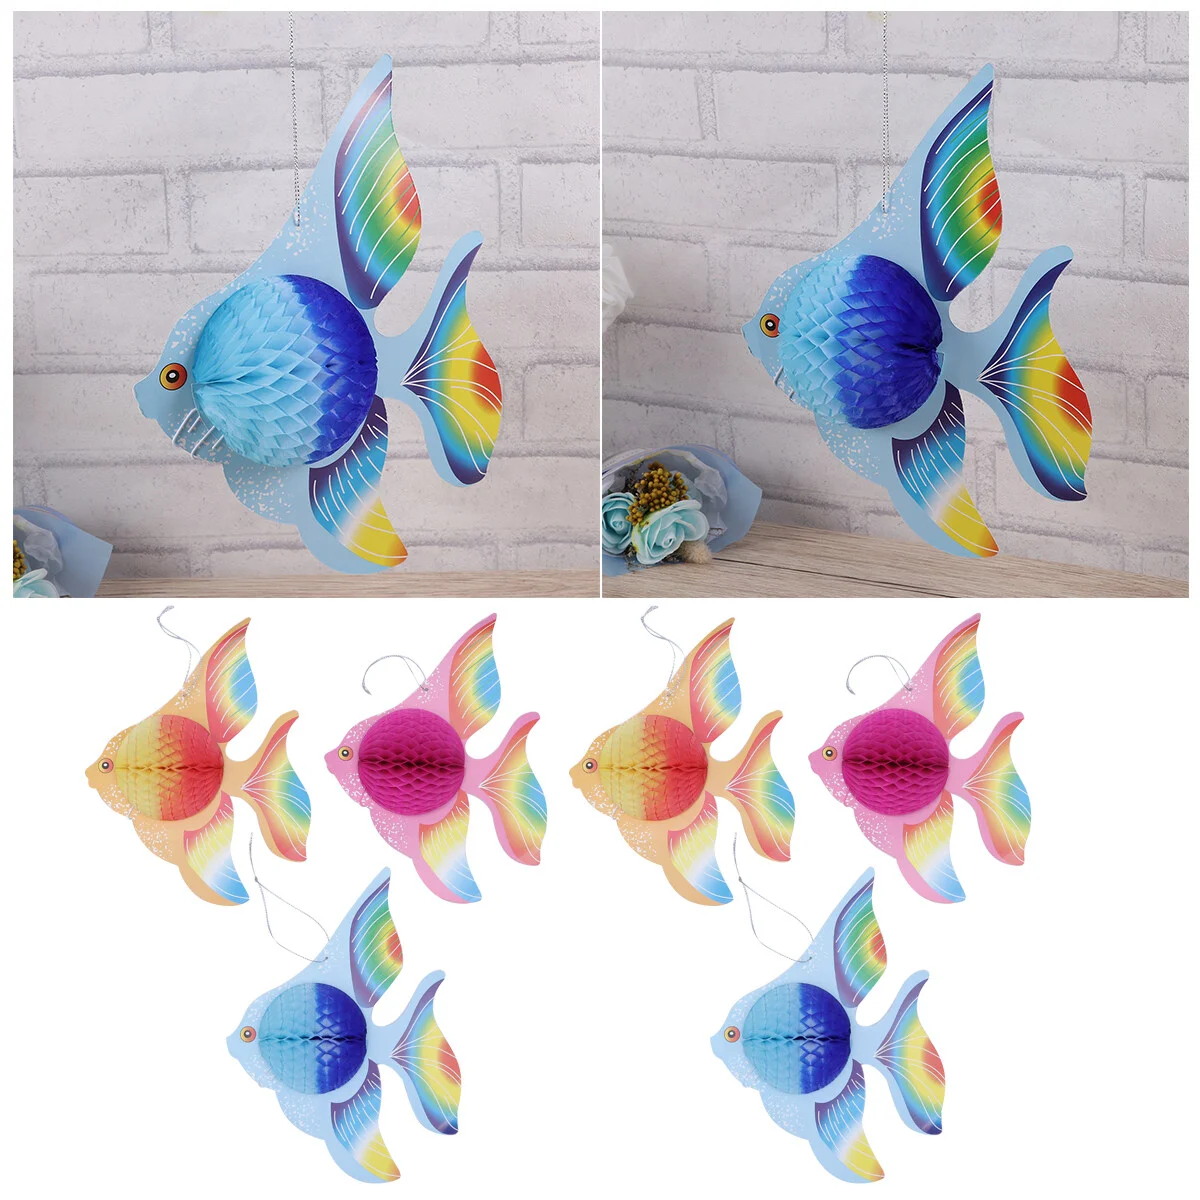 

6pcs Colorful Tissue Paper Goldfish Foldable Tropical Fish Decoration Hanging Ornament Party Supplies (Gold + Pink + Blue)